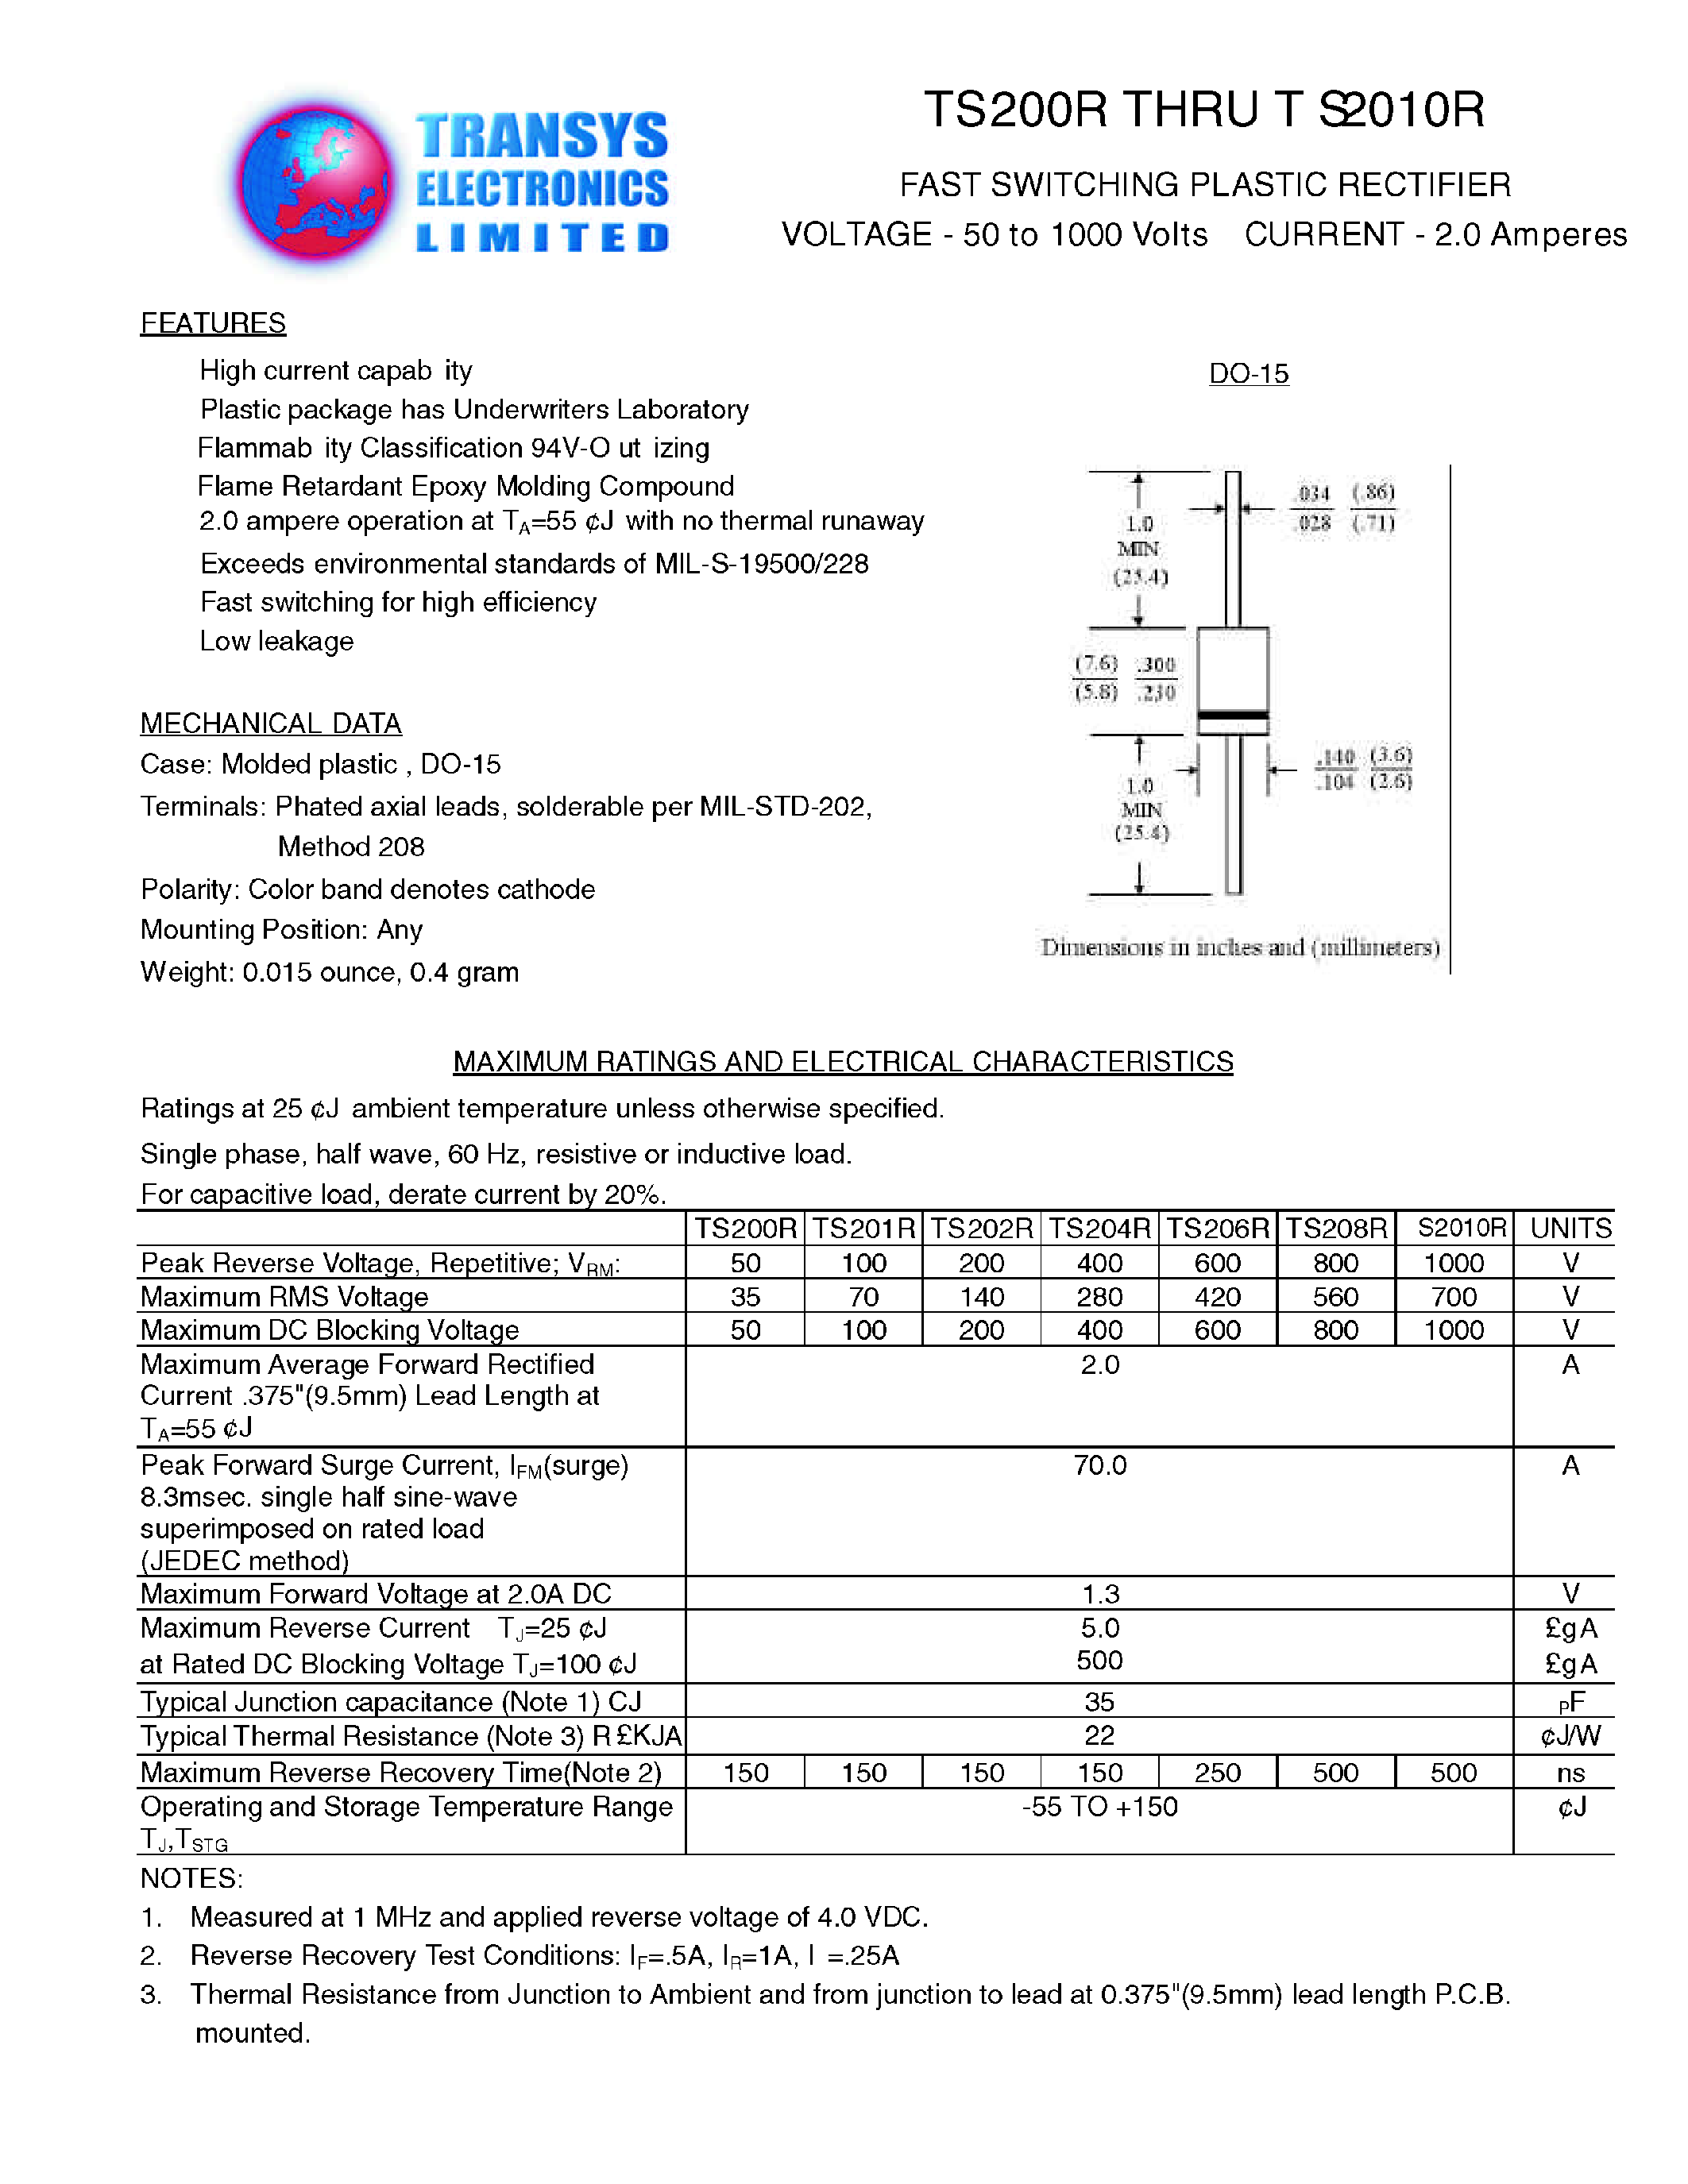 Datasheet TS201R - FAST SWITCHIING RECTIFIER(Reverse Voltage - 50 to 1000 Volts/ Current - 2.0Ampere) page 1